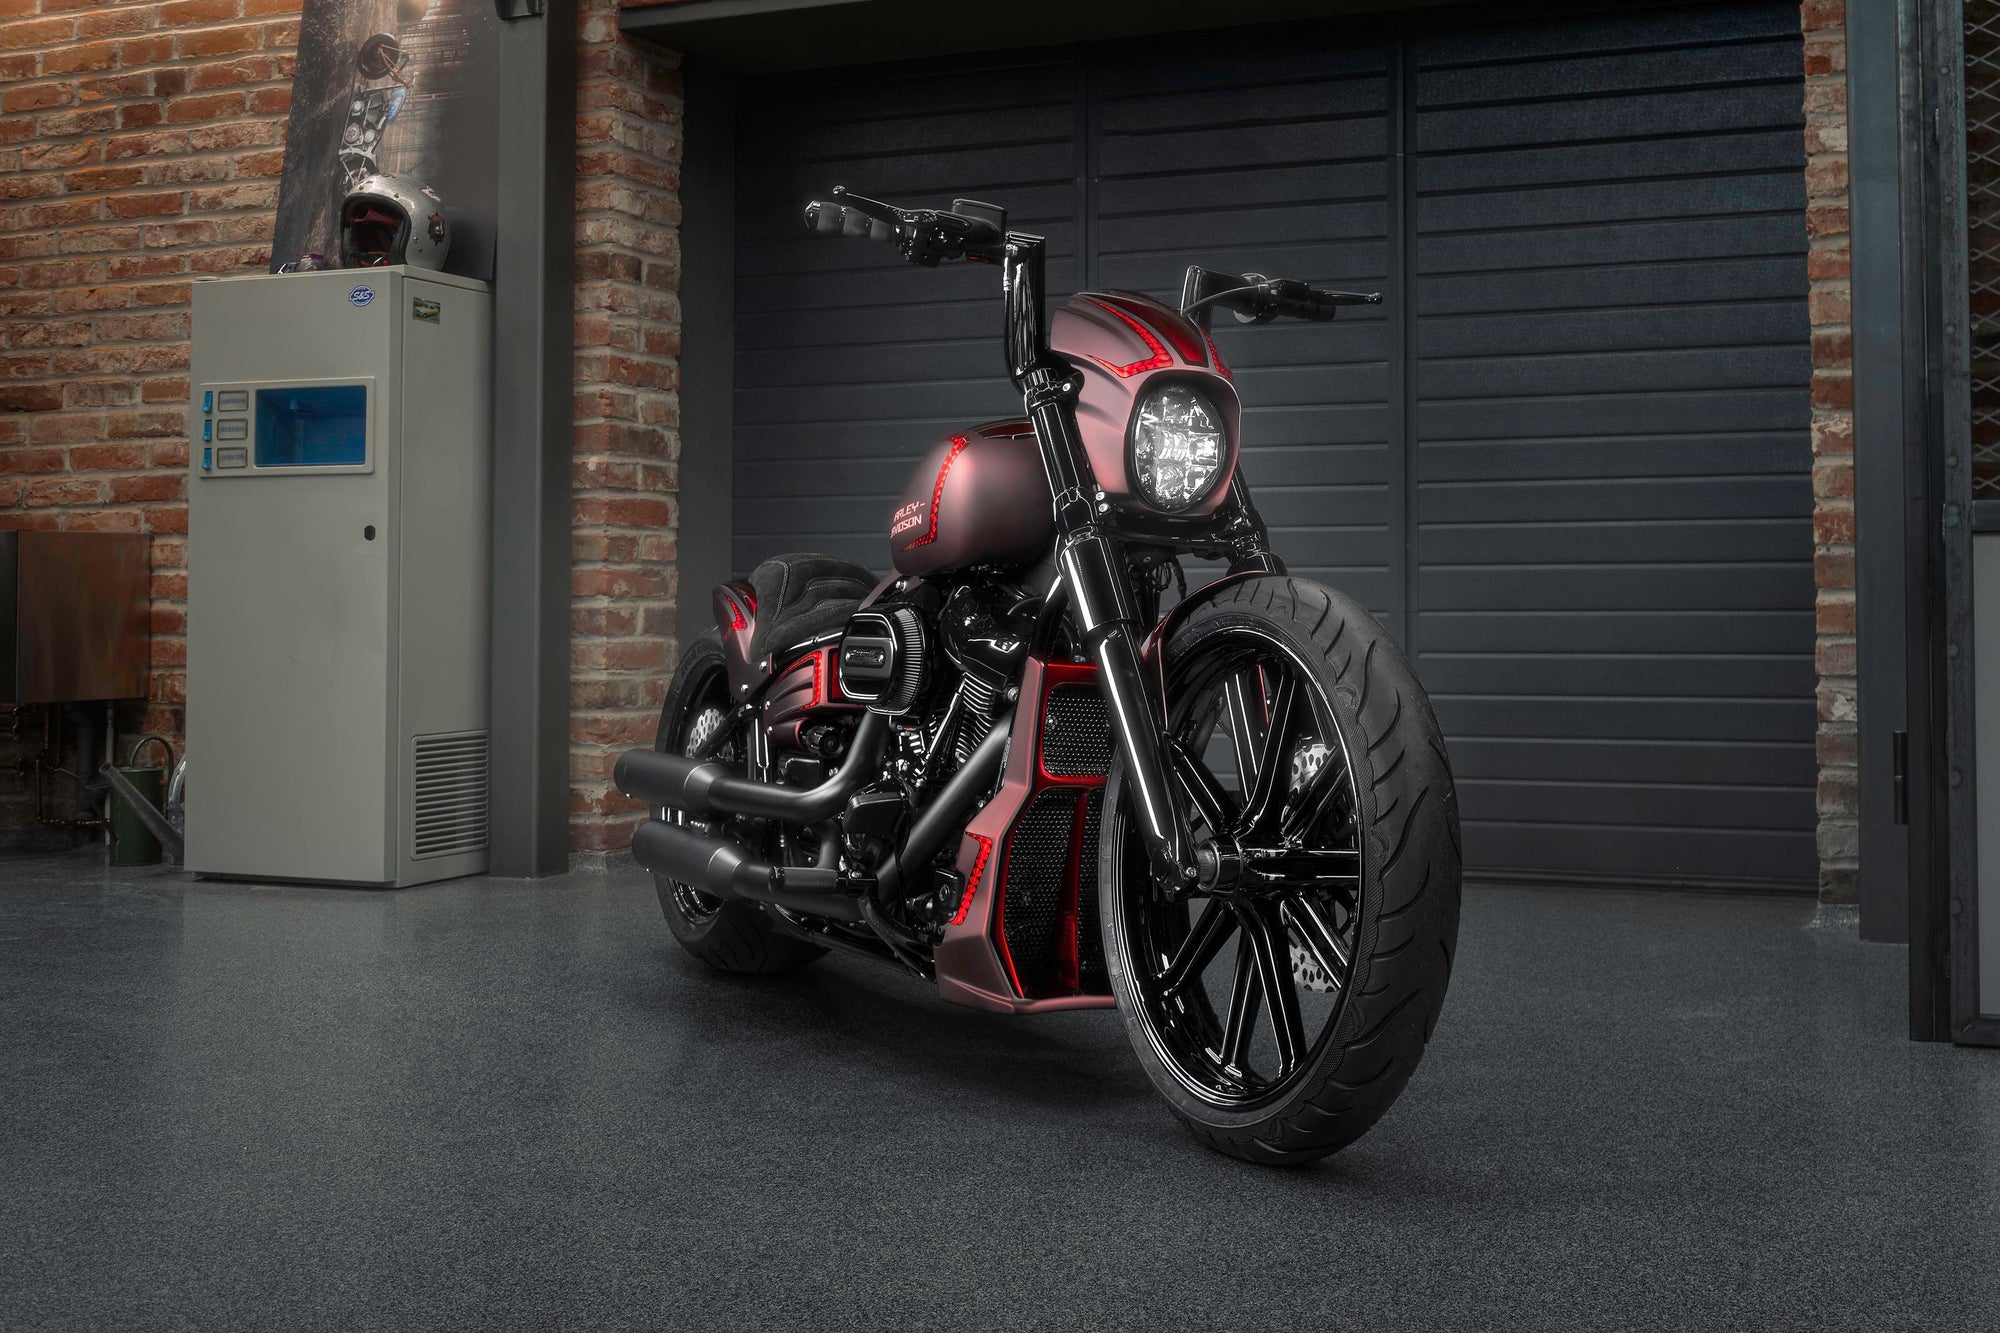 Zoomed Harley Davidson motorcycle with Killer Custom parts from the front in a modern garage